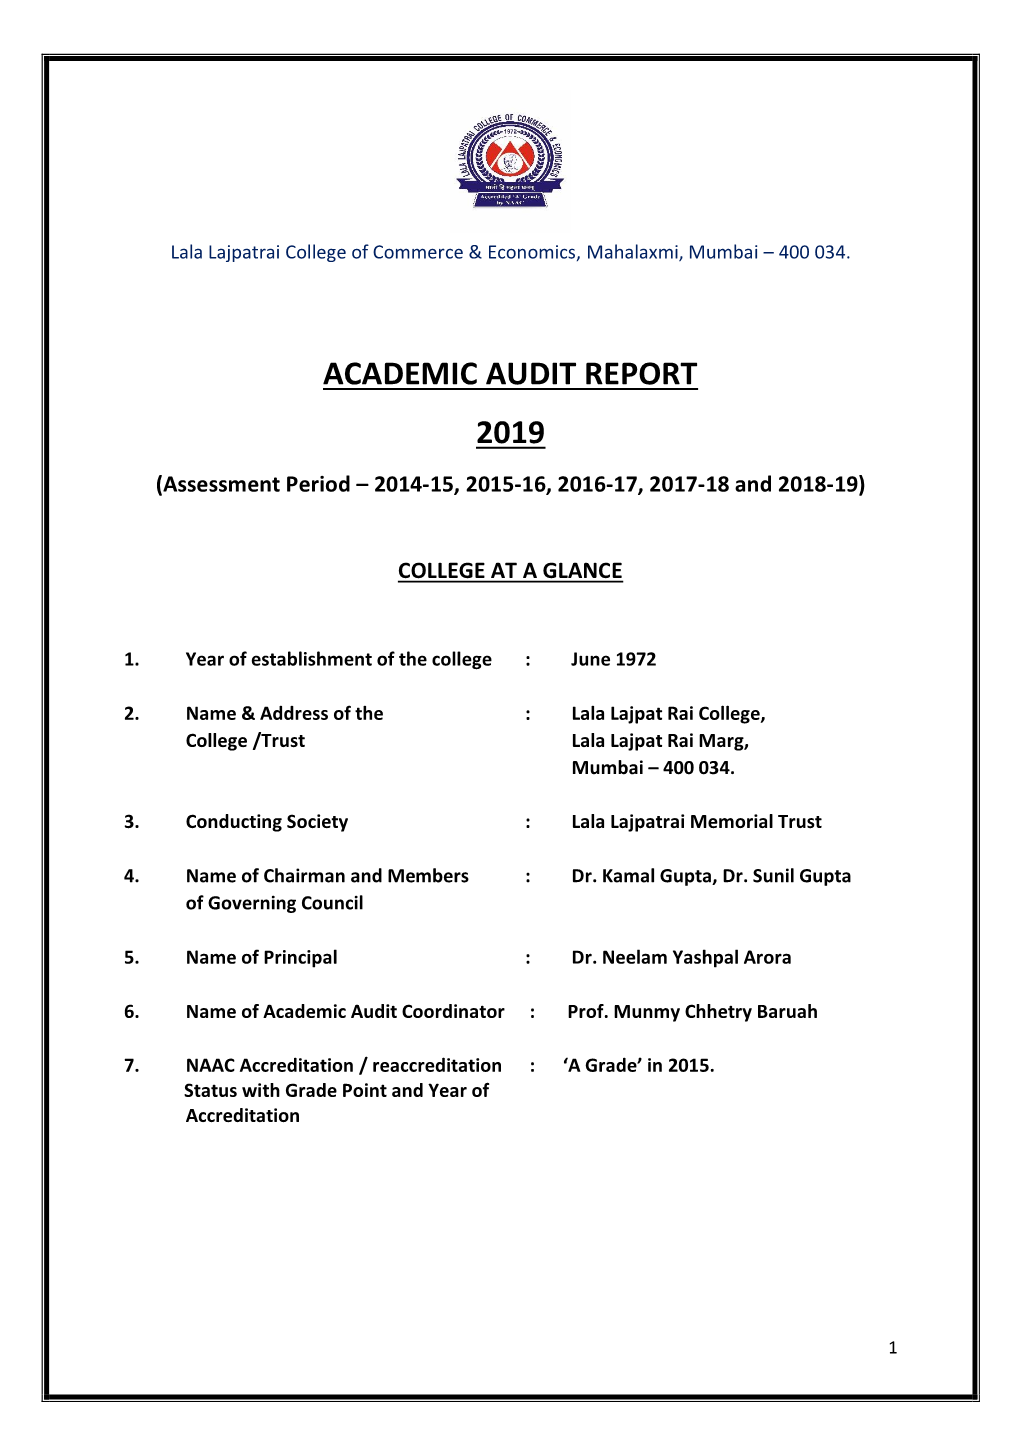 ACADEMIC AUDIT REPORT 2019 (Assessment Period – 2014-15, 2015-16, 2016-17, 2017-18 and 2018-19)